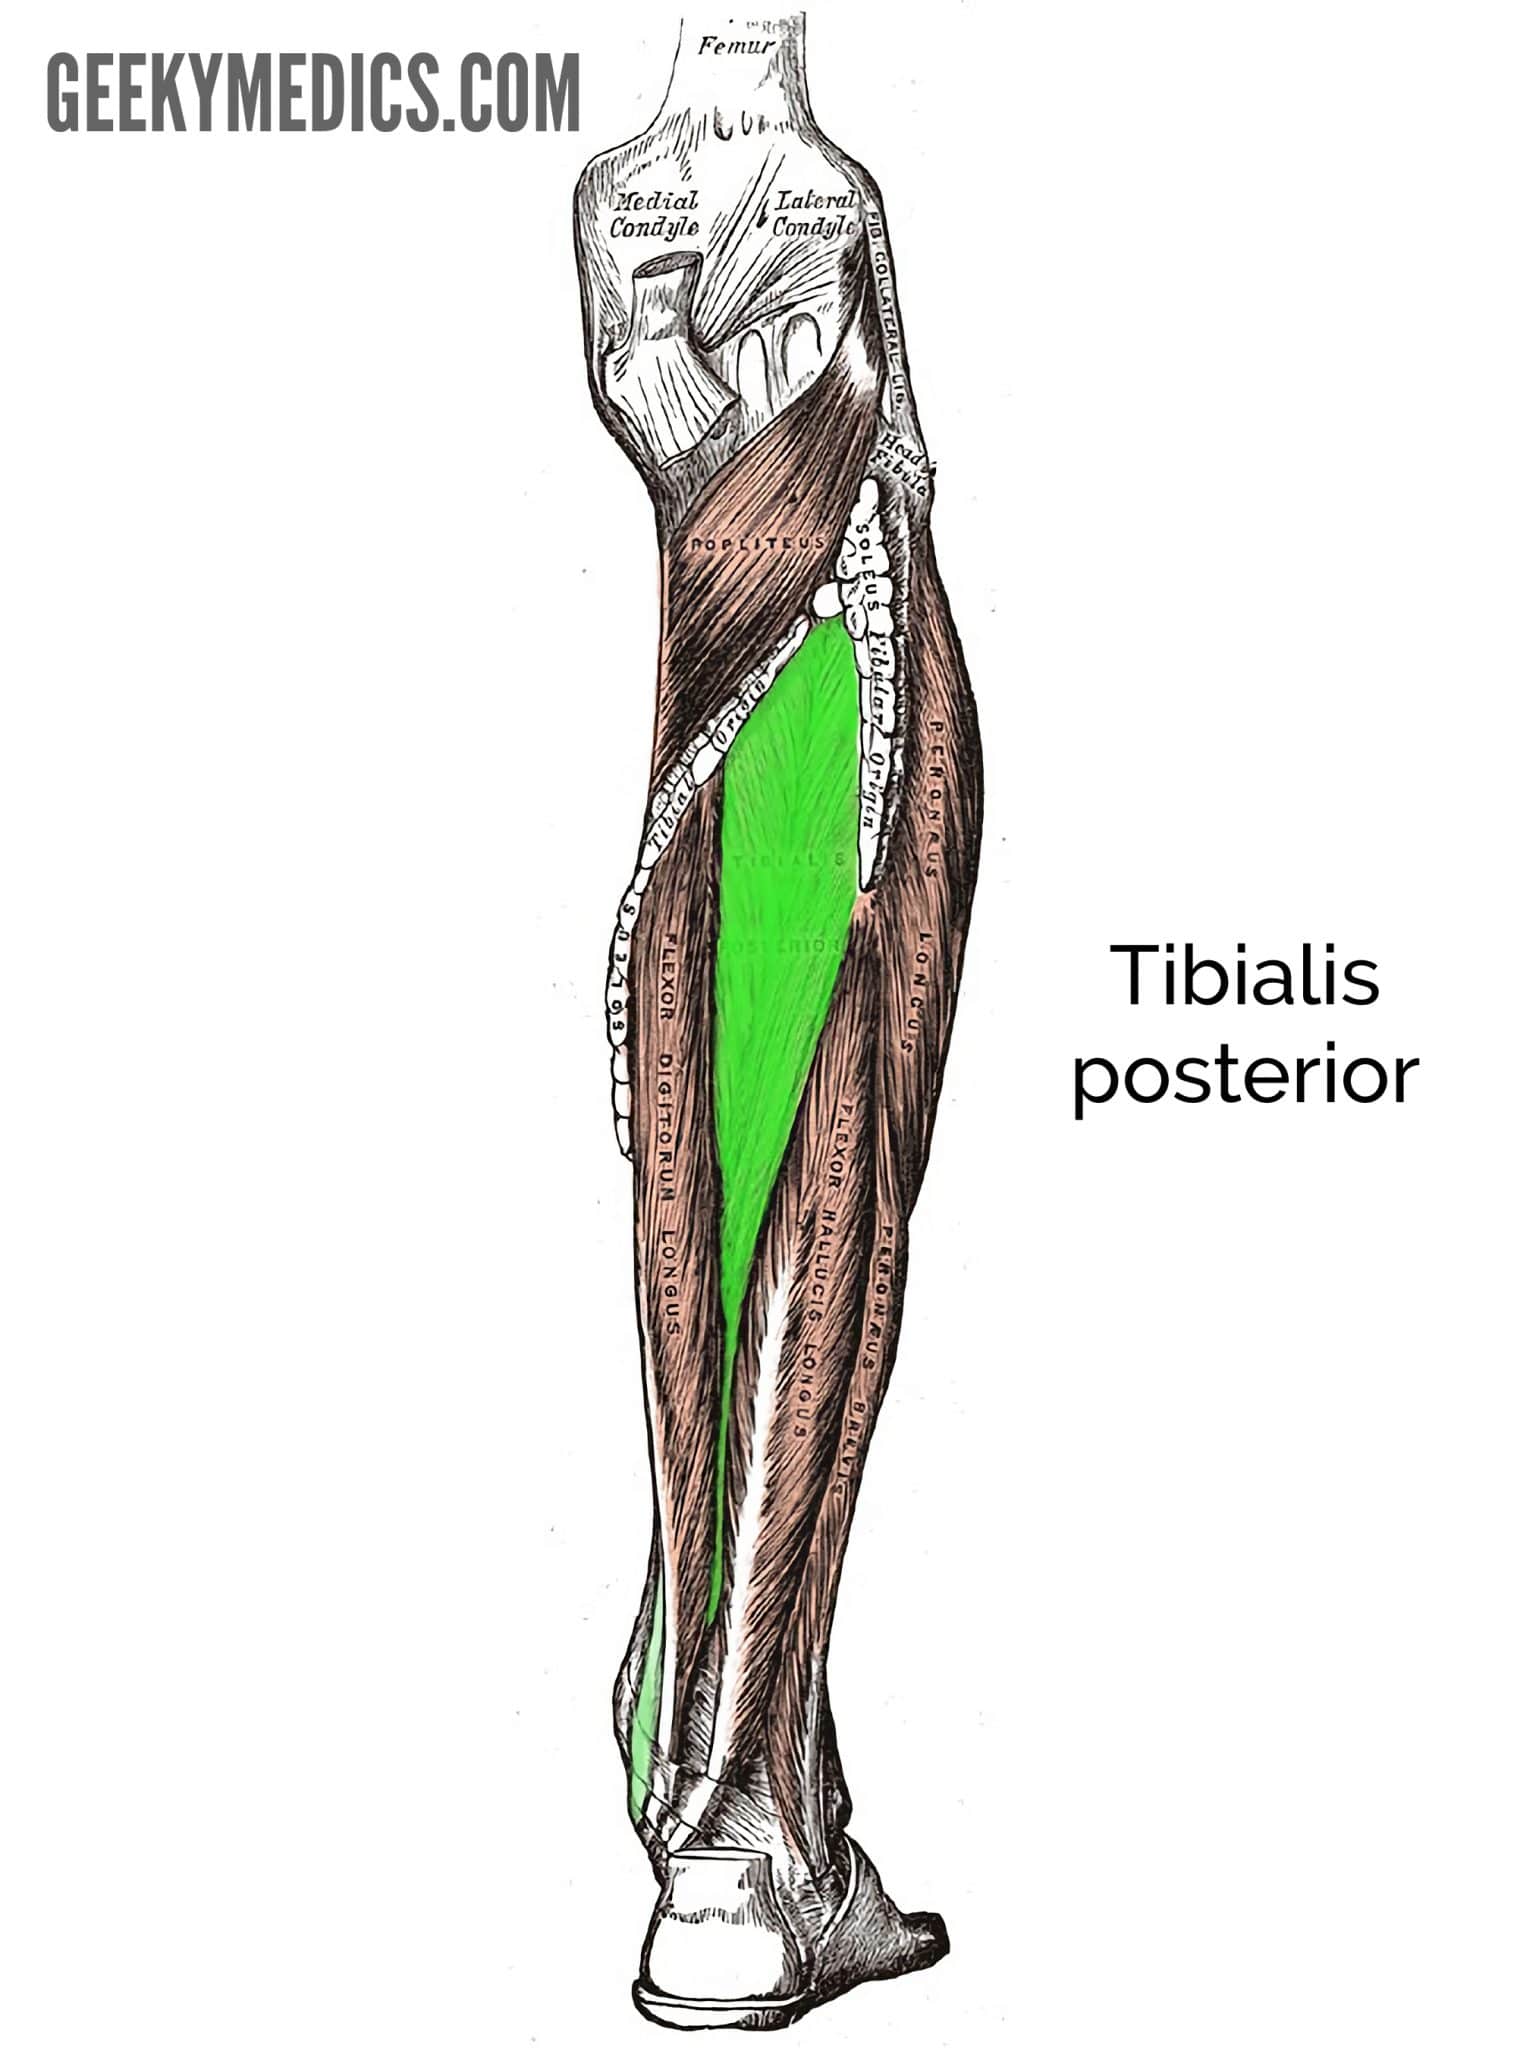 Calf Muscles - Posterior Compartment - Superficial